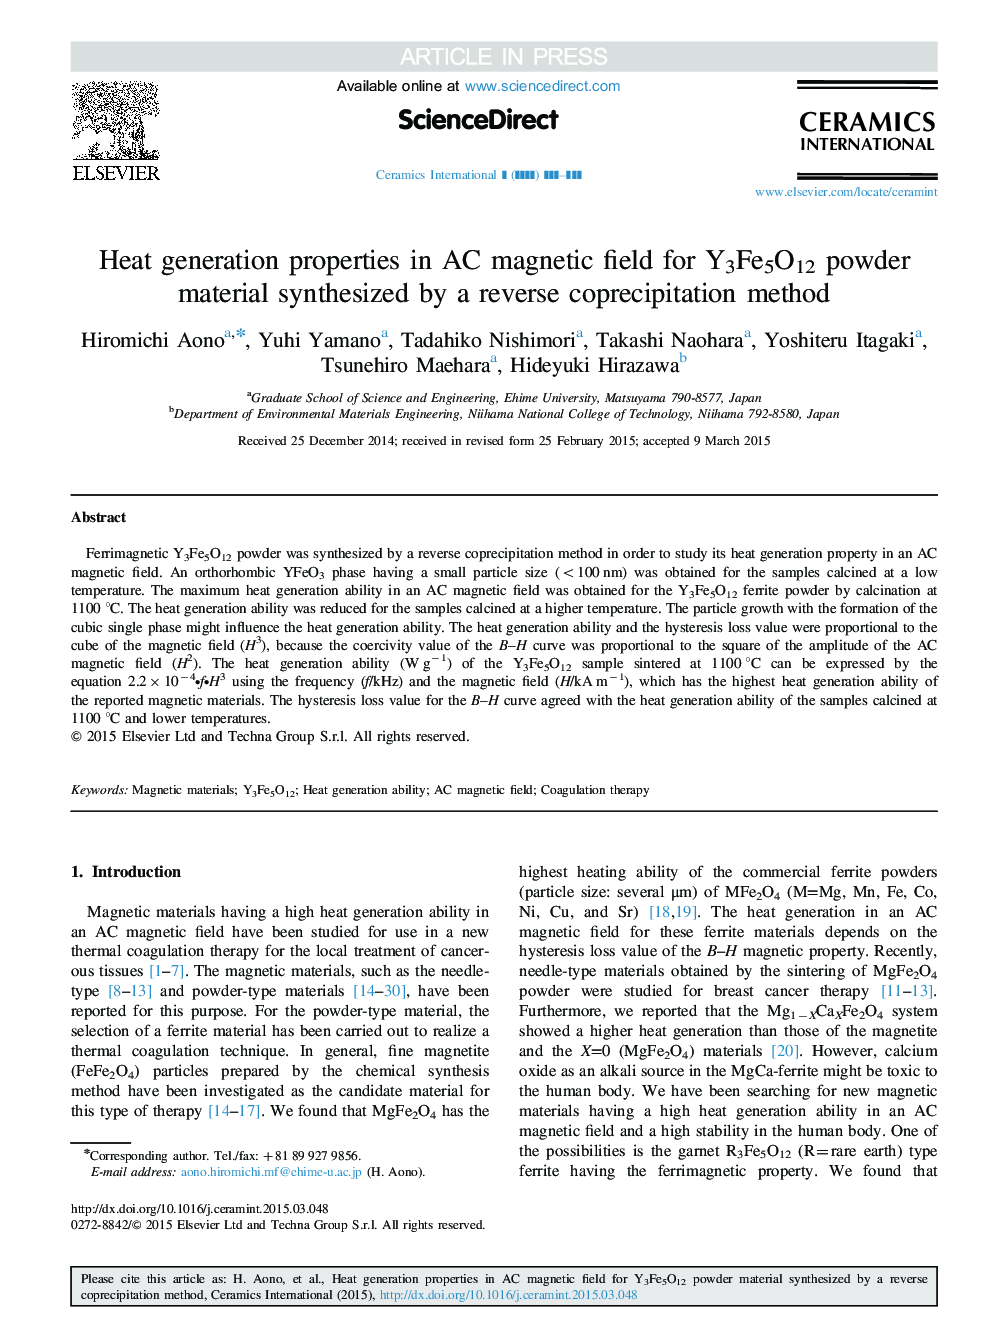 Heat generation properties in AC magnetic field for Y3Fe5O12 powder material synthesized by a reverse coprecipitation method